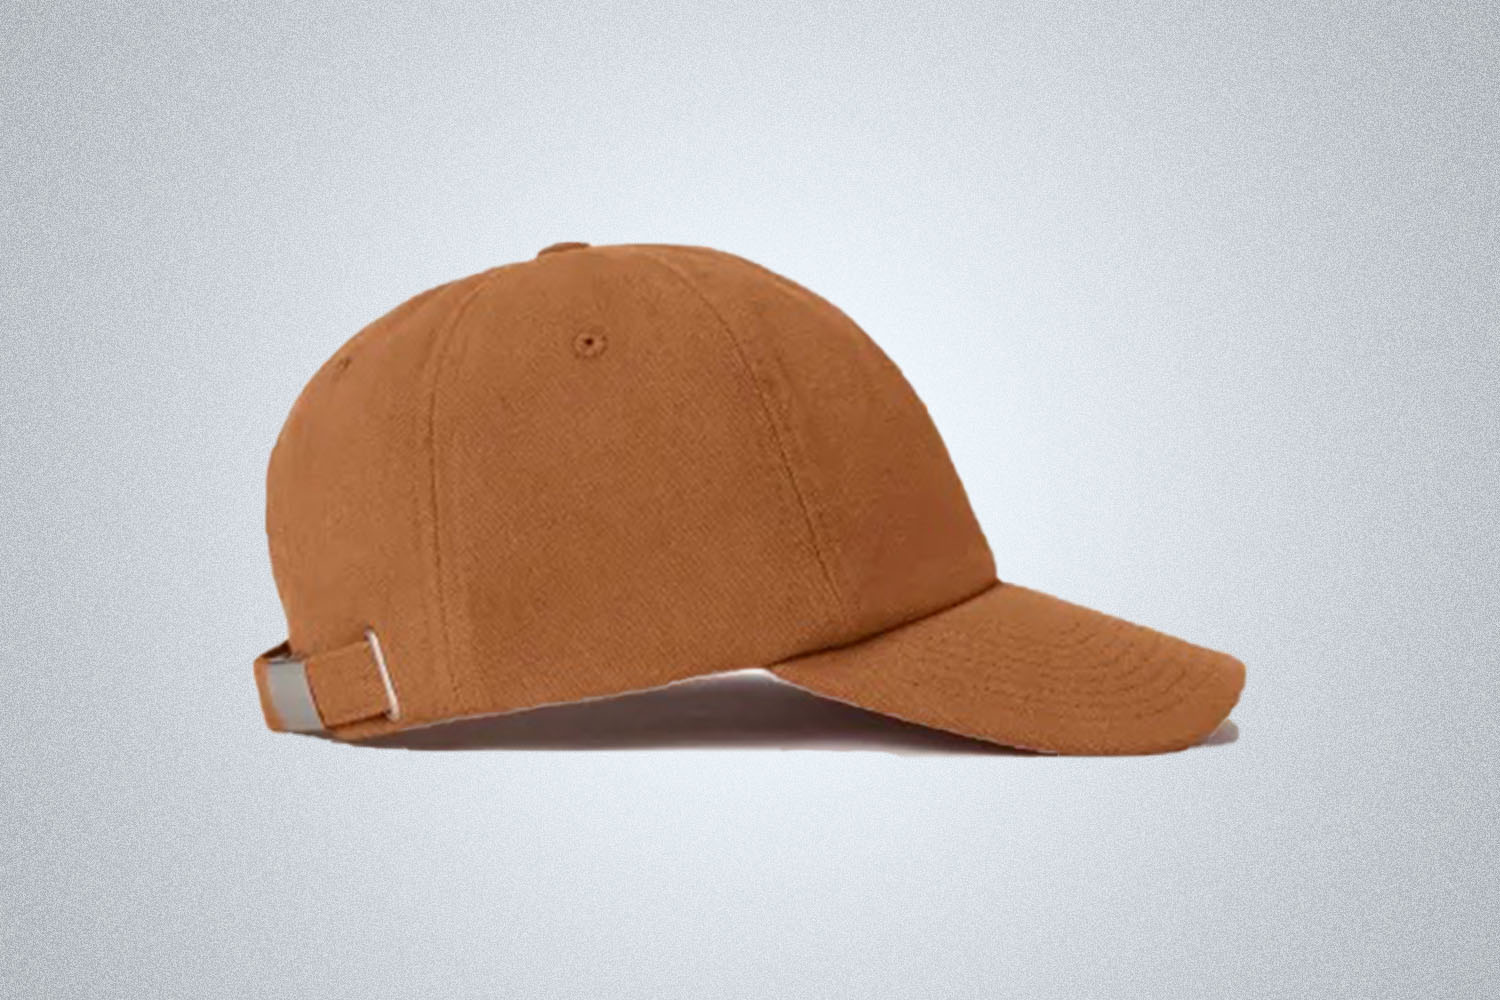 a beige colored baseball cap from the side from Everlane on a grey background